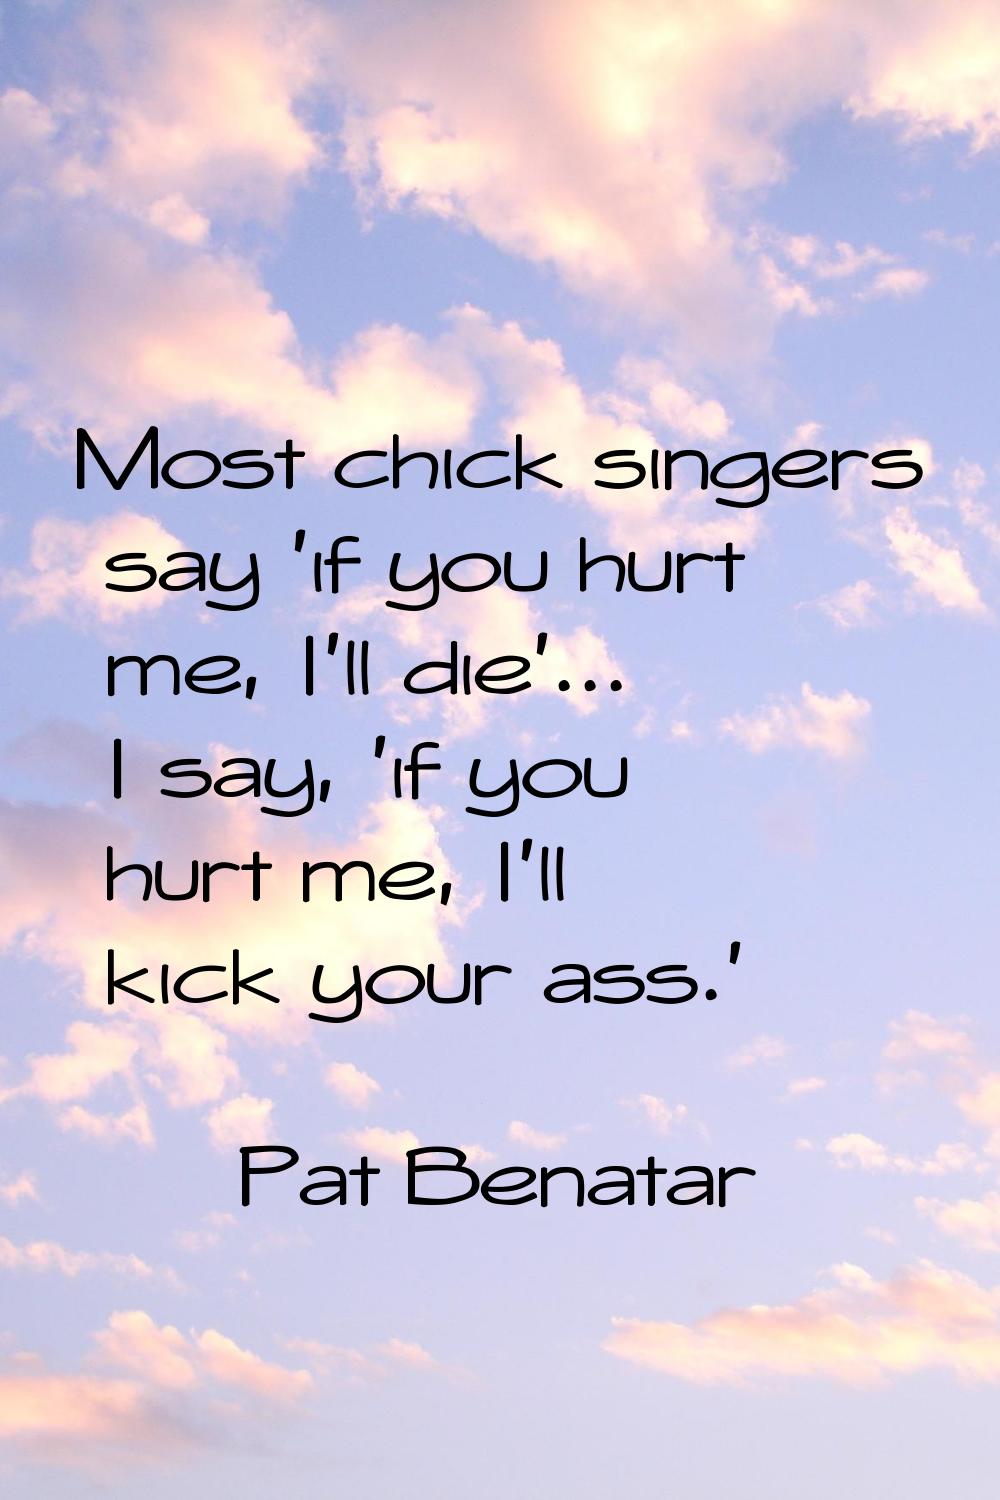 Most chick singers say 'if you hurt me, I'll die'... I say, 'if you hurt me, I'll kick your ass.'